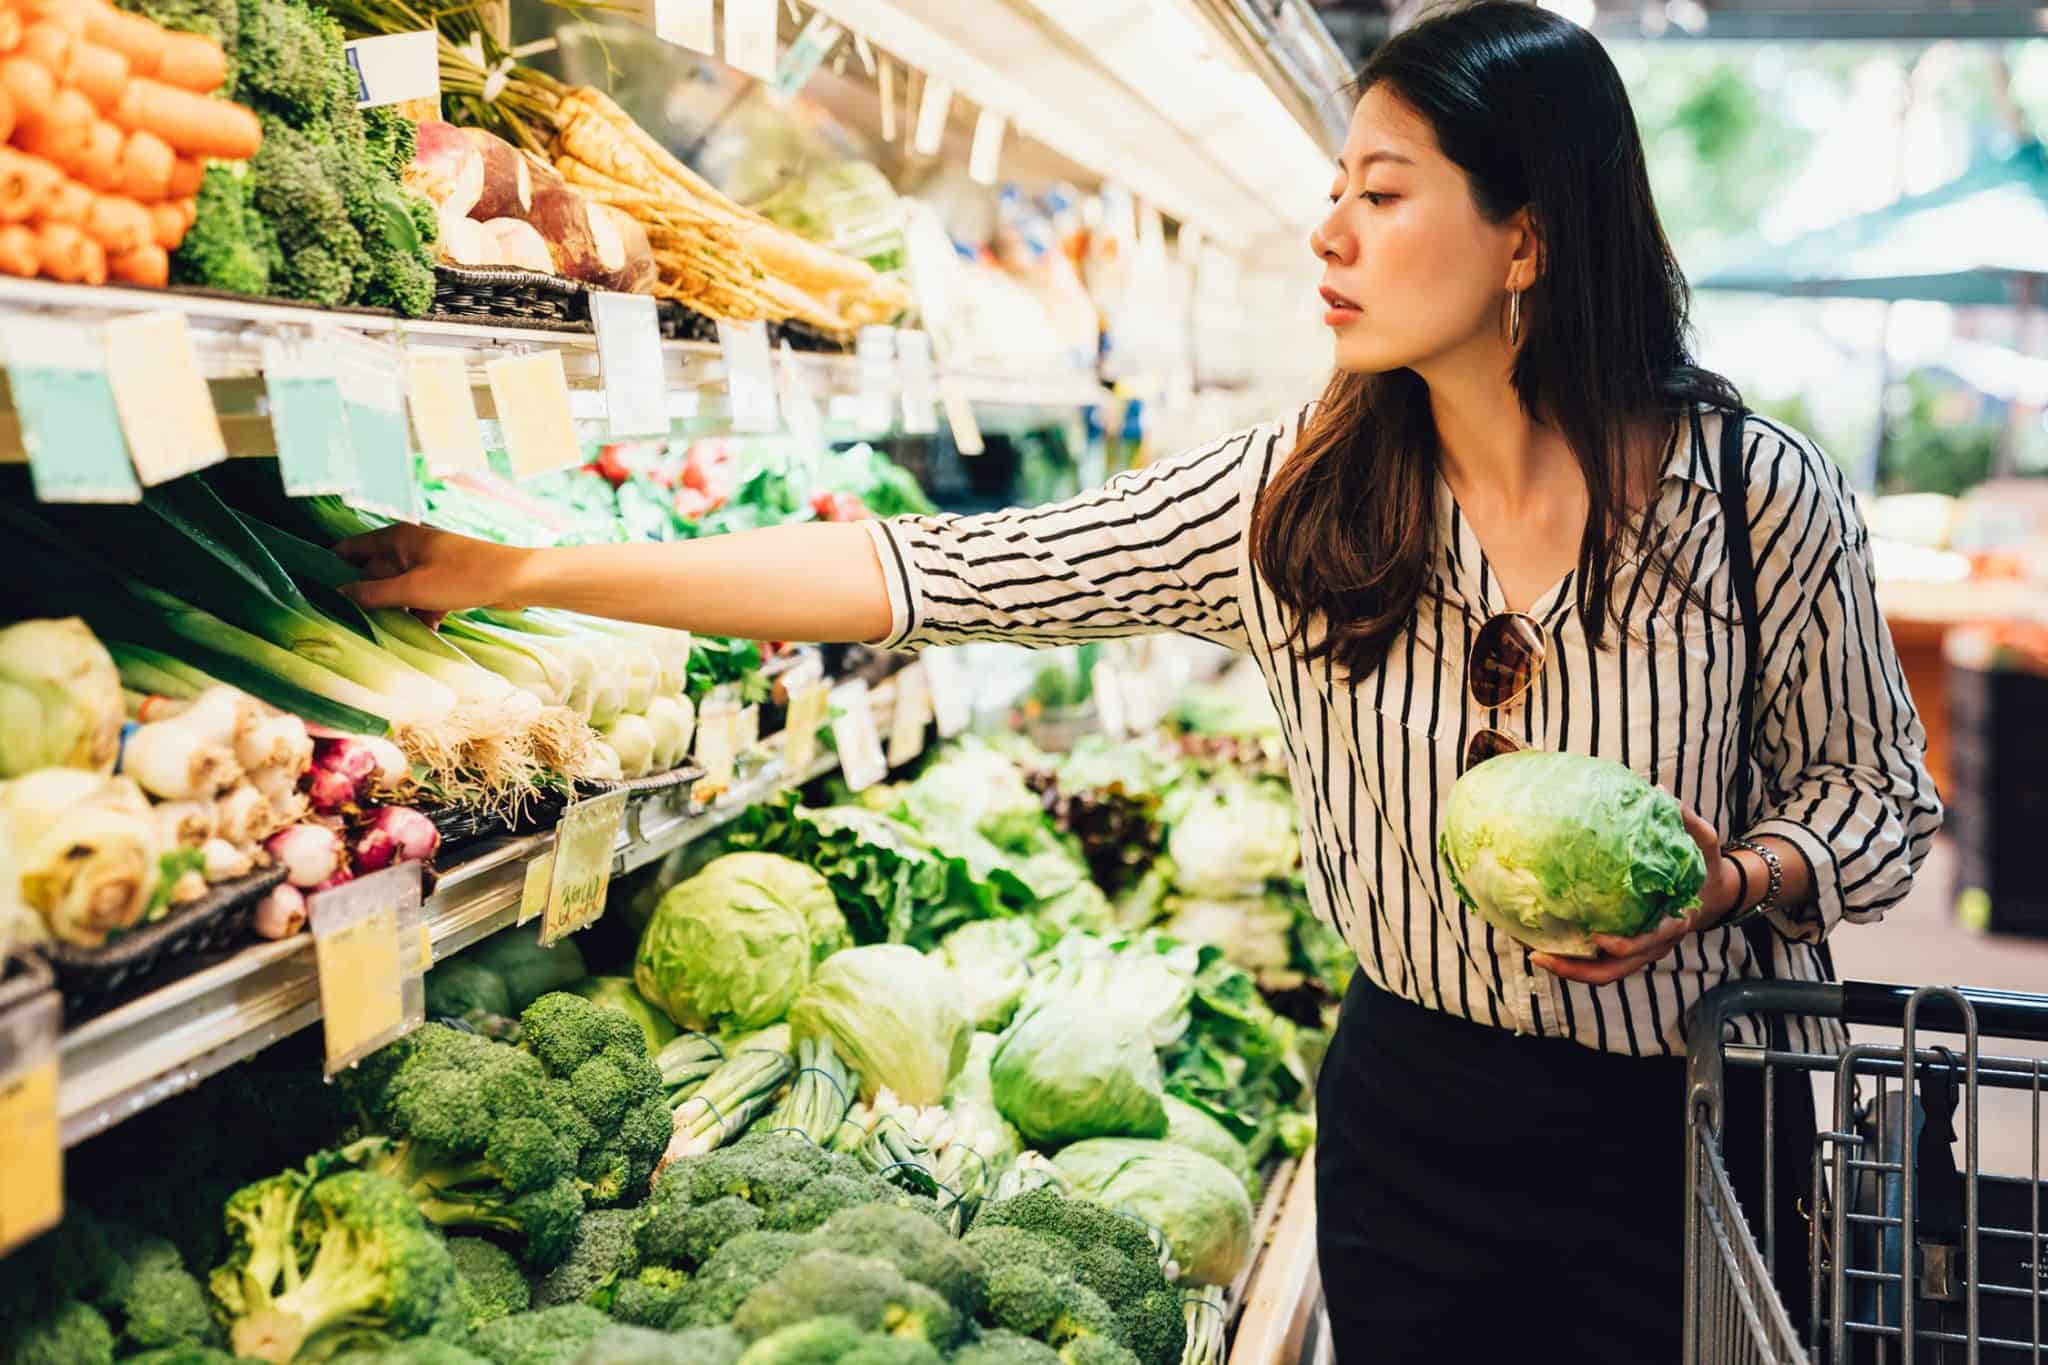 A woman at the grocery store holding a head of lettuce while looking for other vegetable produce.